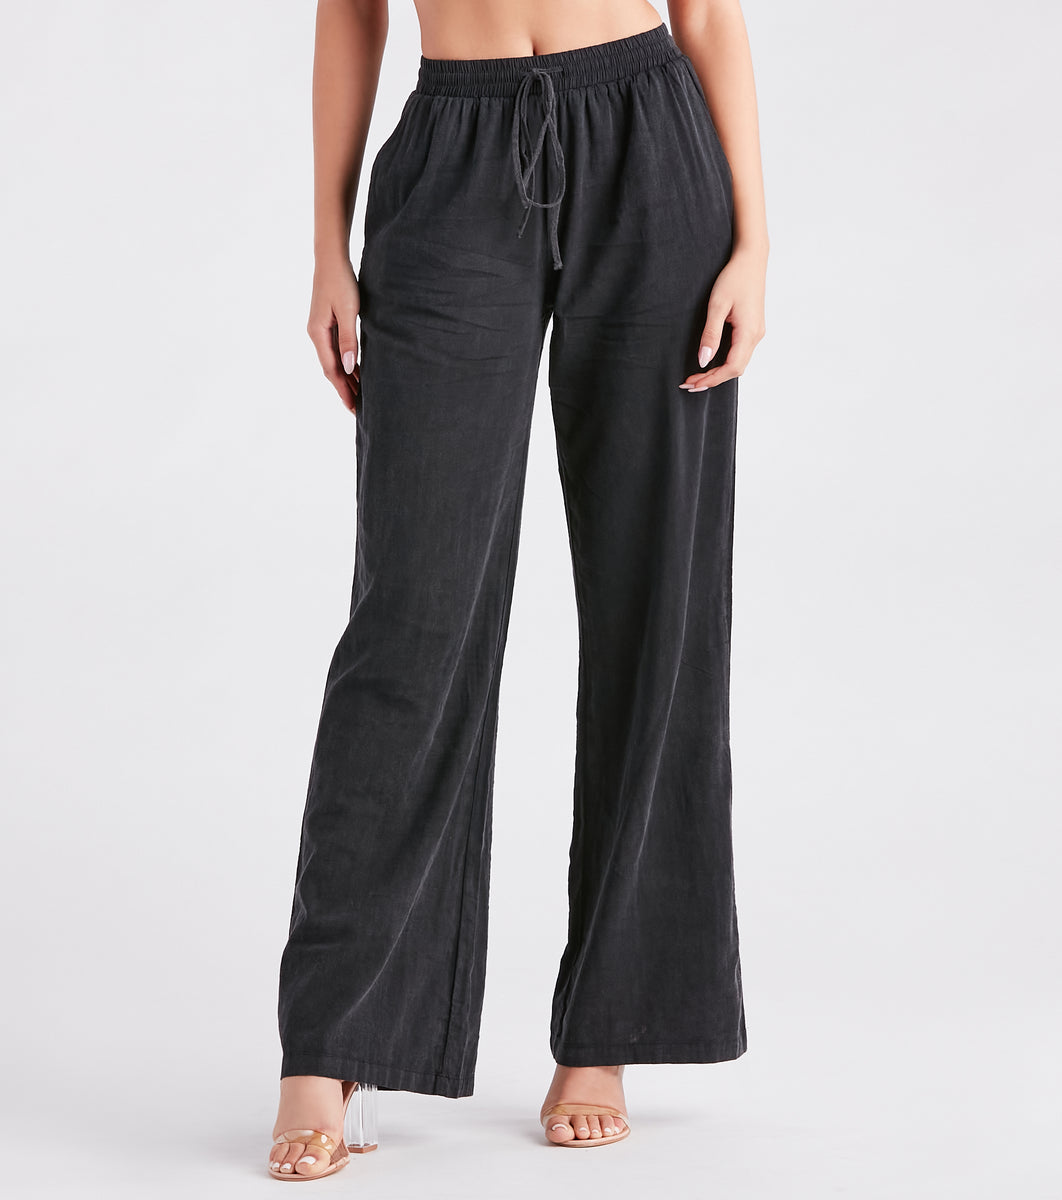 Black Gauze Pants With Ankle Tie Detail · Filly Flair